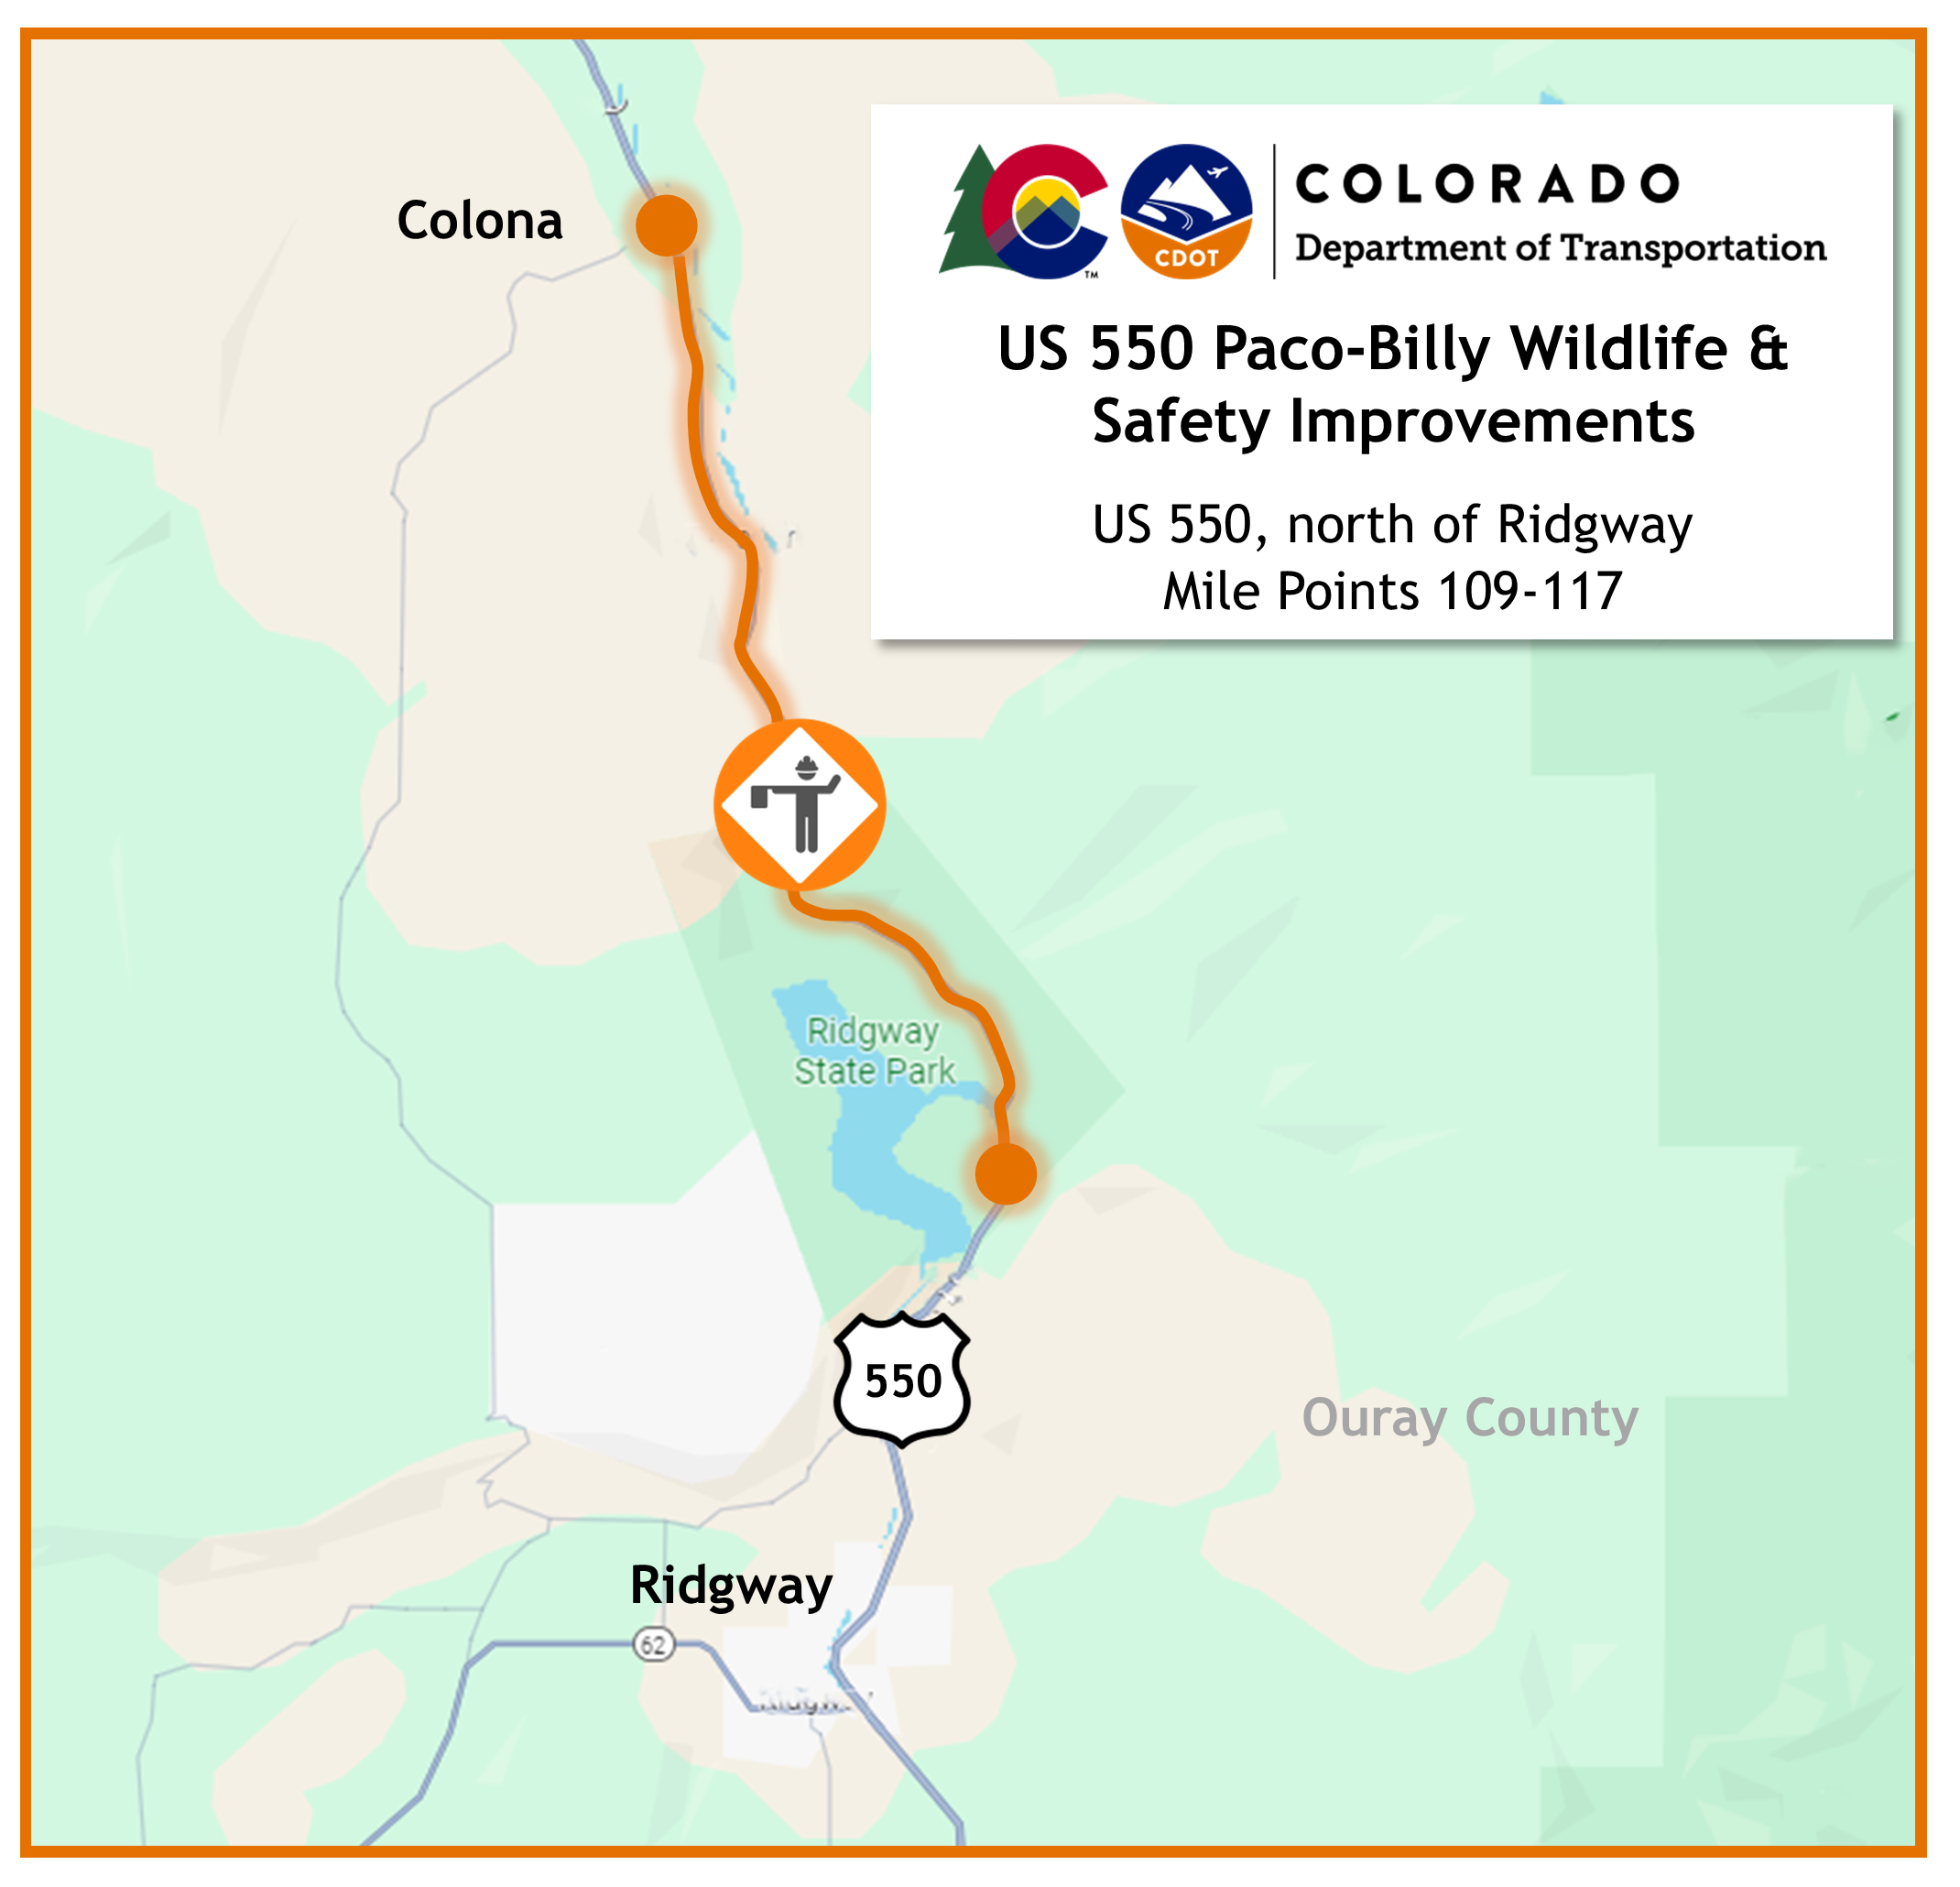 US 550 Paco - Billy Wildlife & Safety Improvements Project map between Ridgway and Colona Mile Points 109 - 117.png detail image